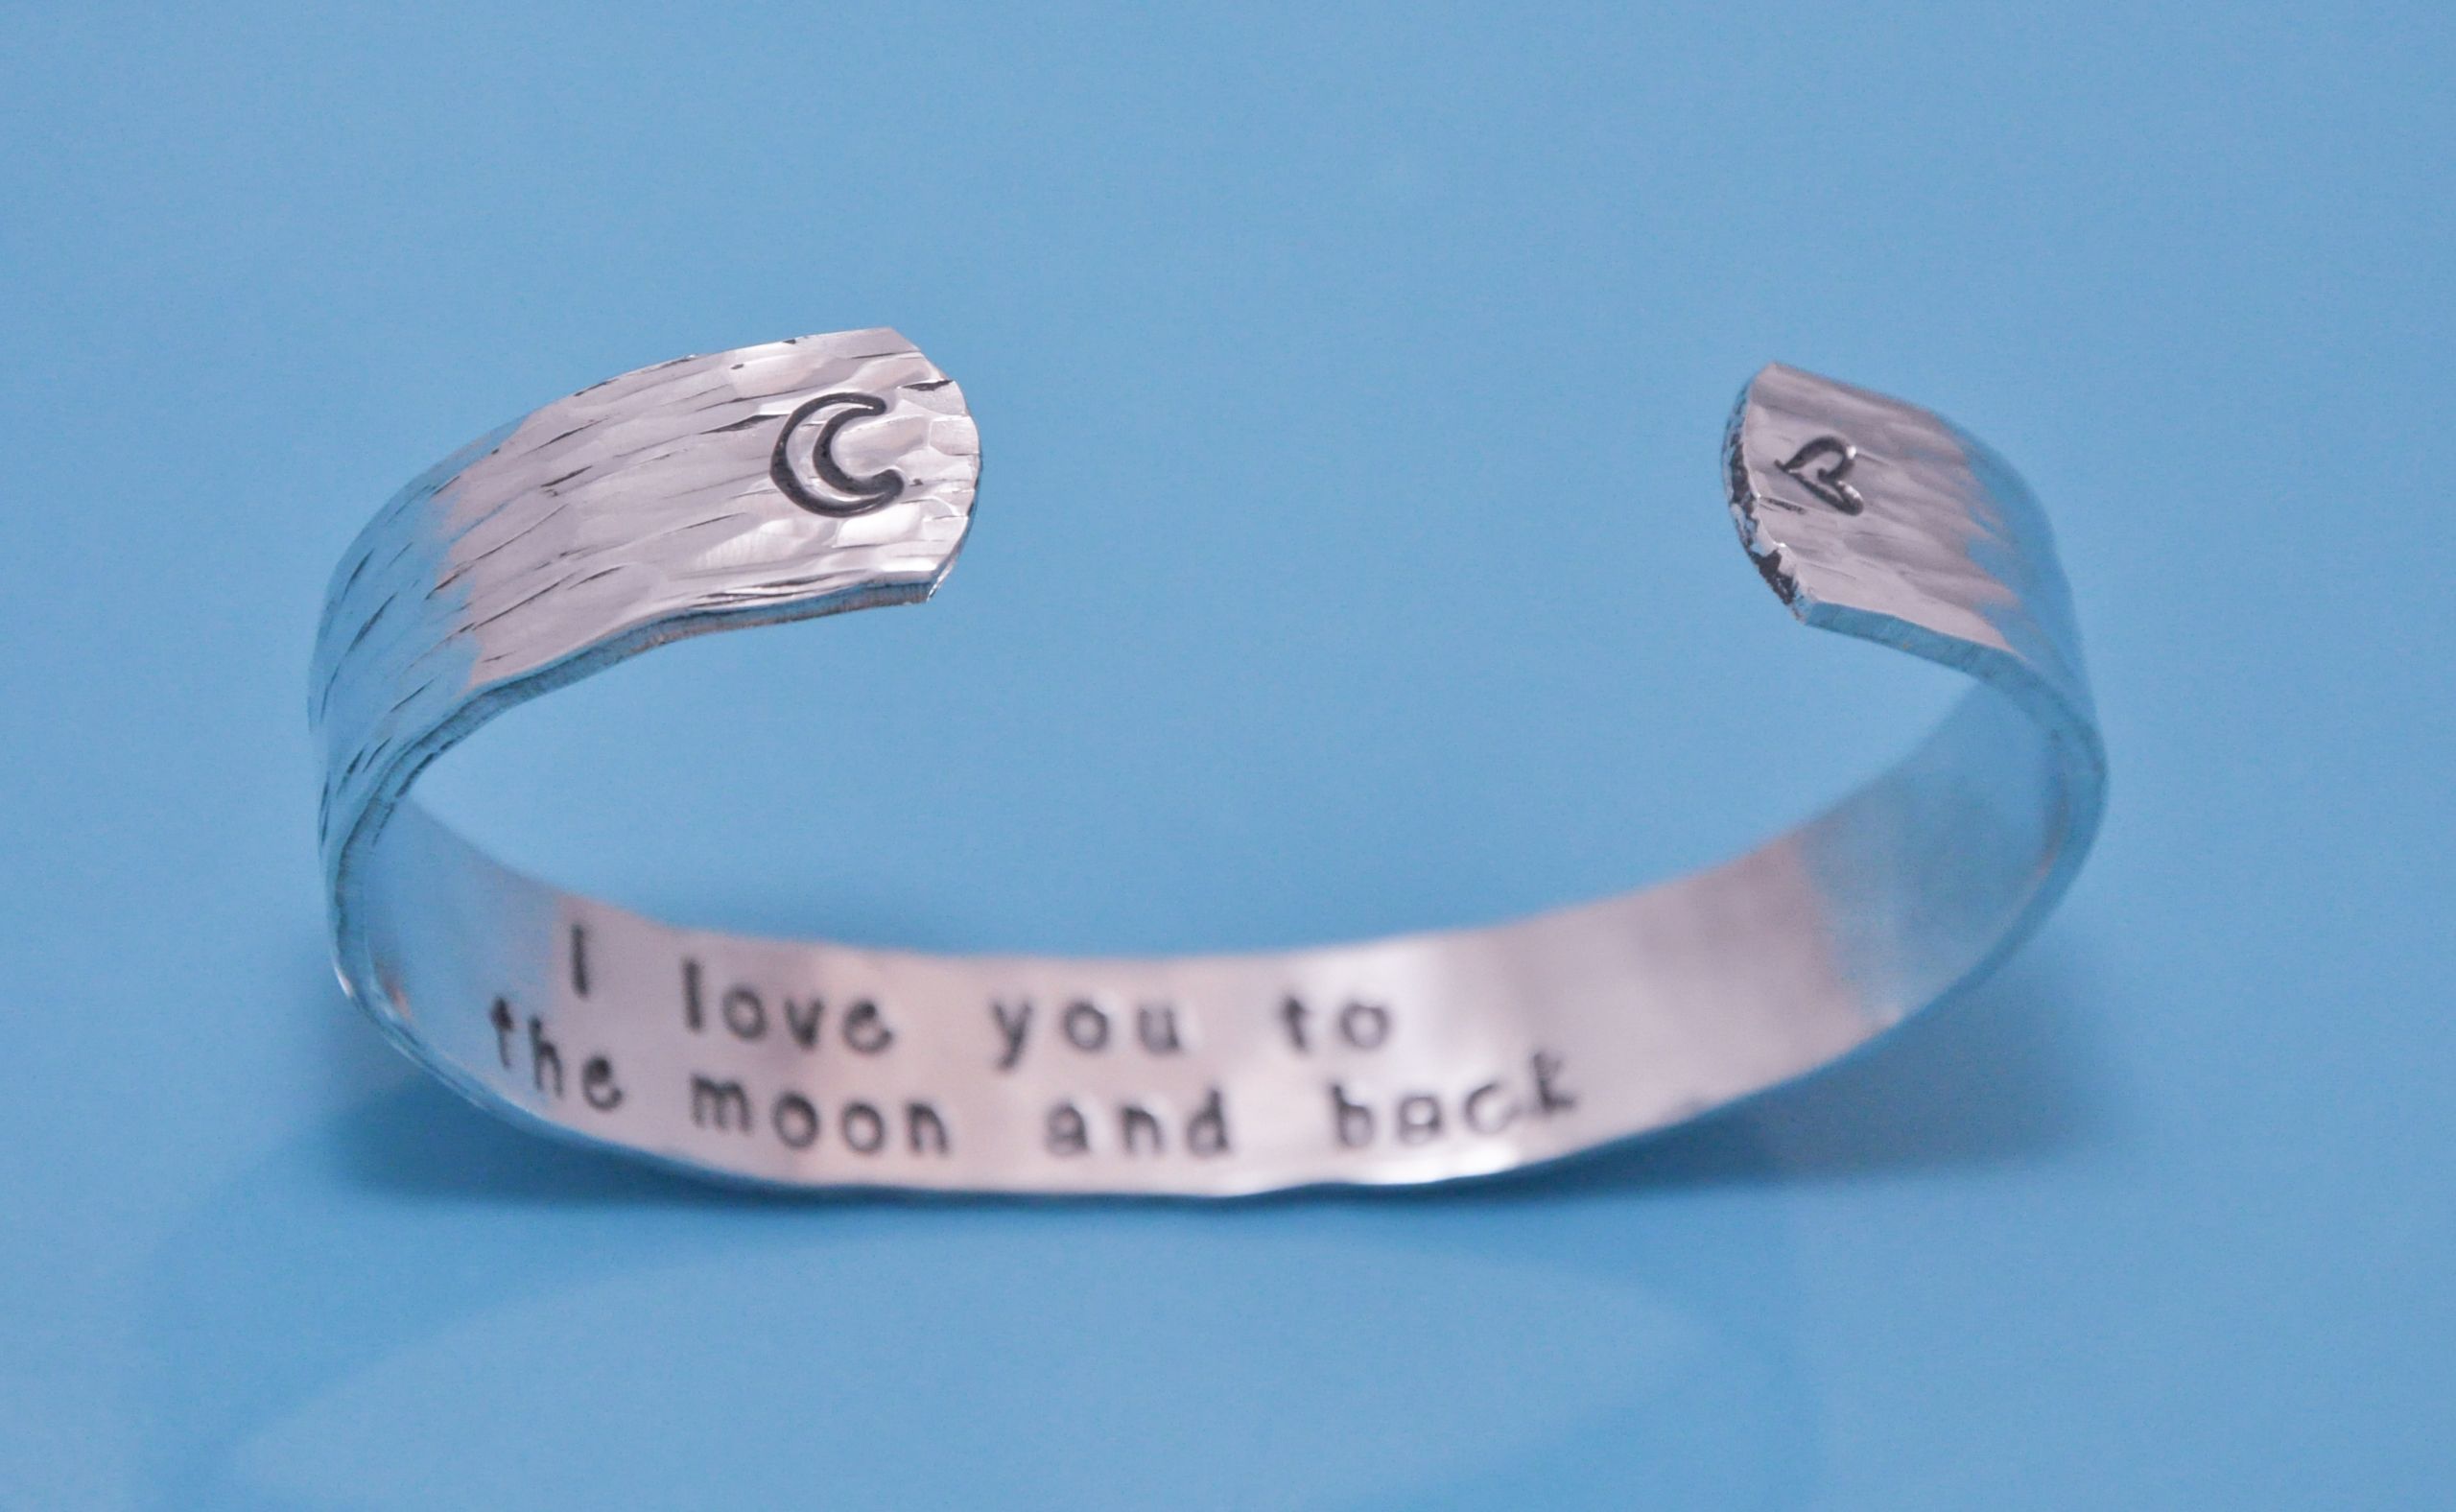 Love You To The Moon And Back Bracelet
 I love you to the moon and back – bracelet